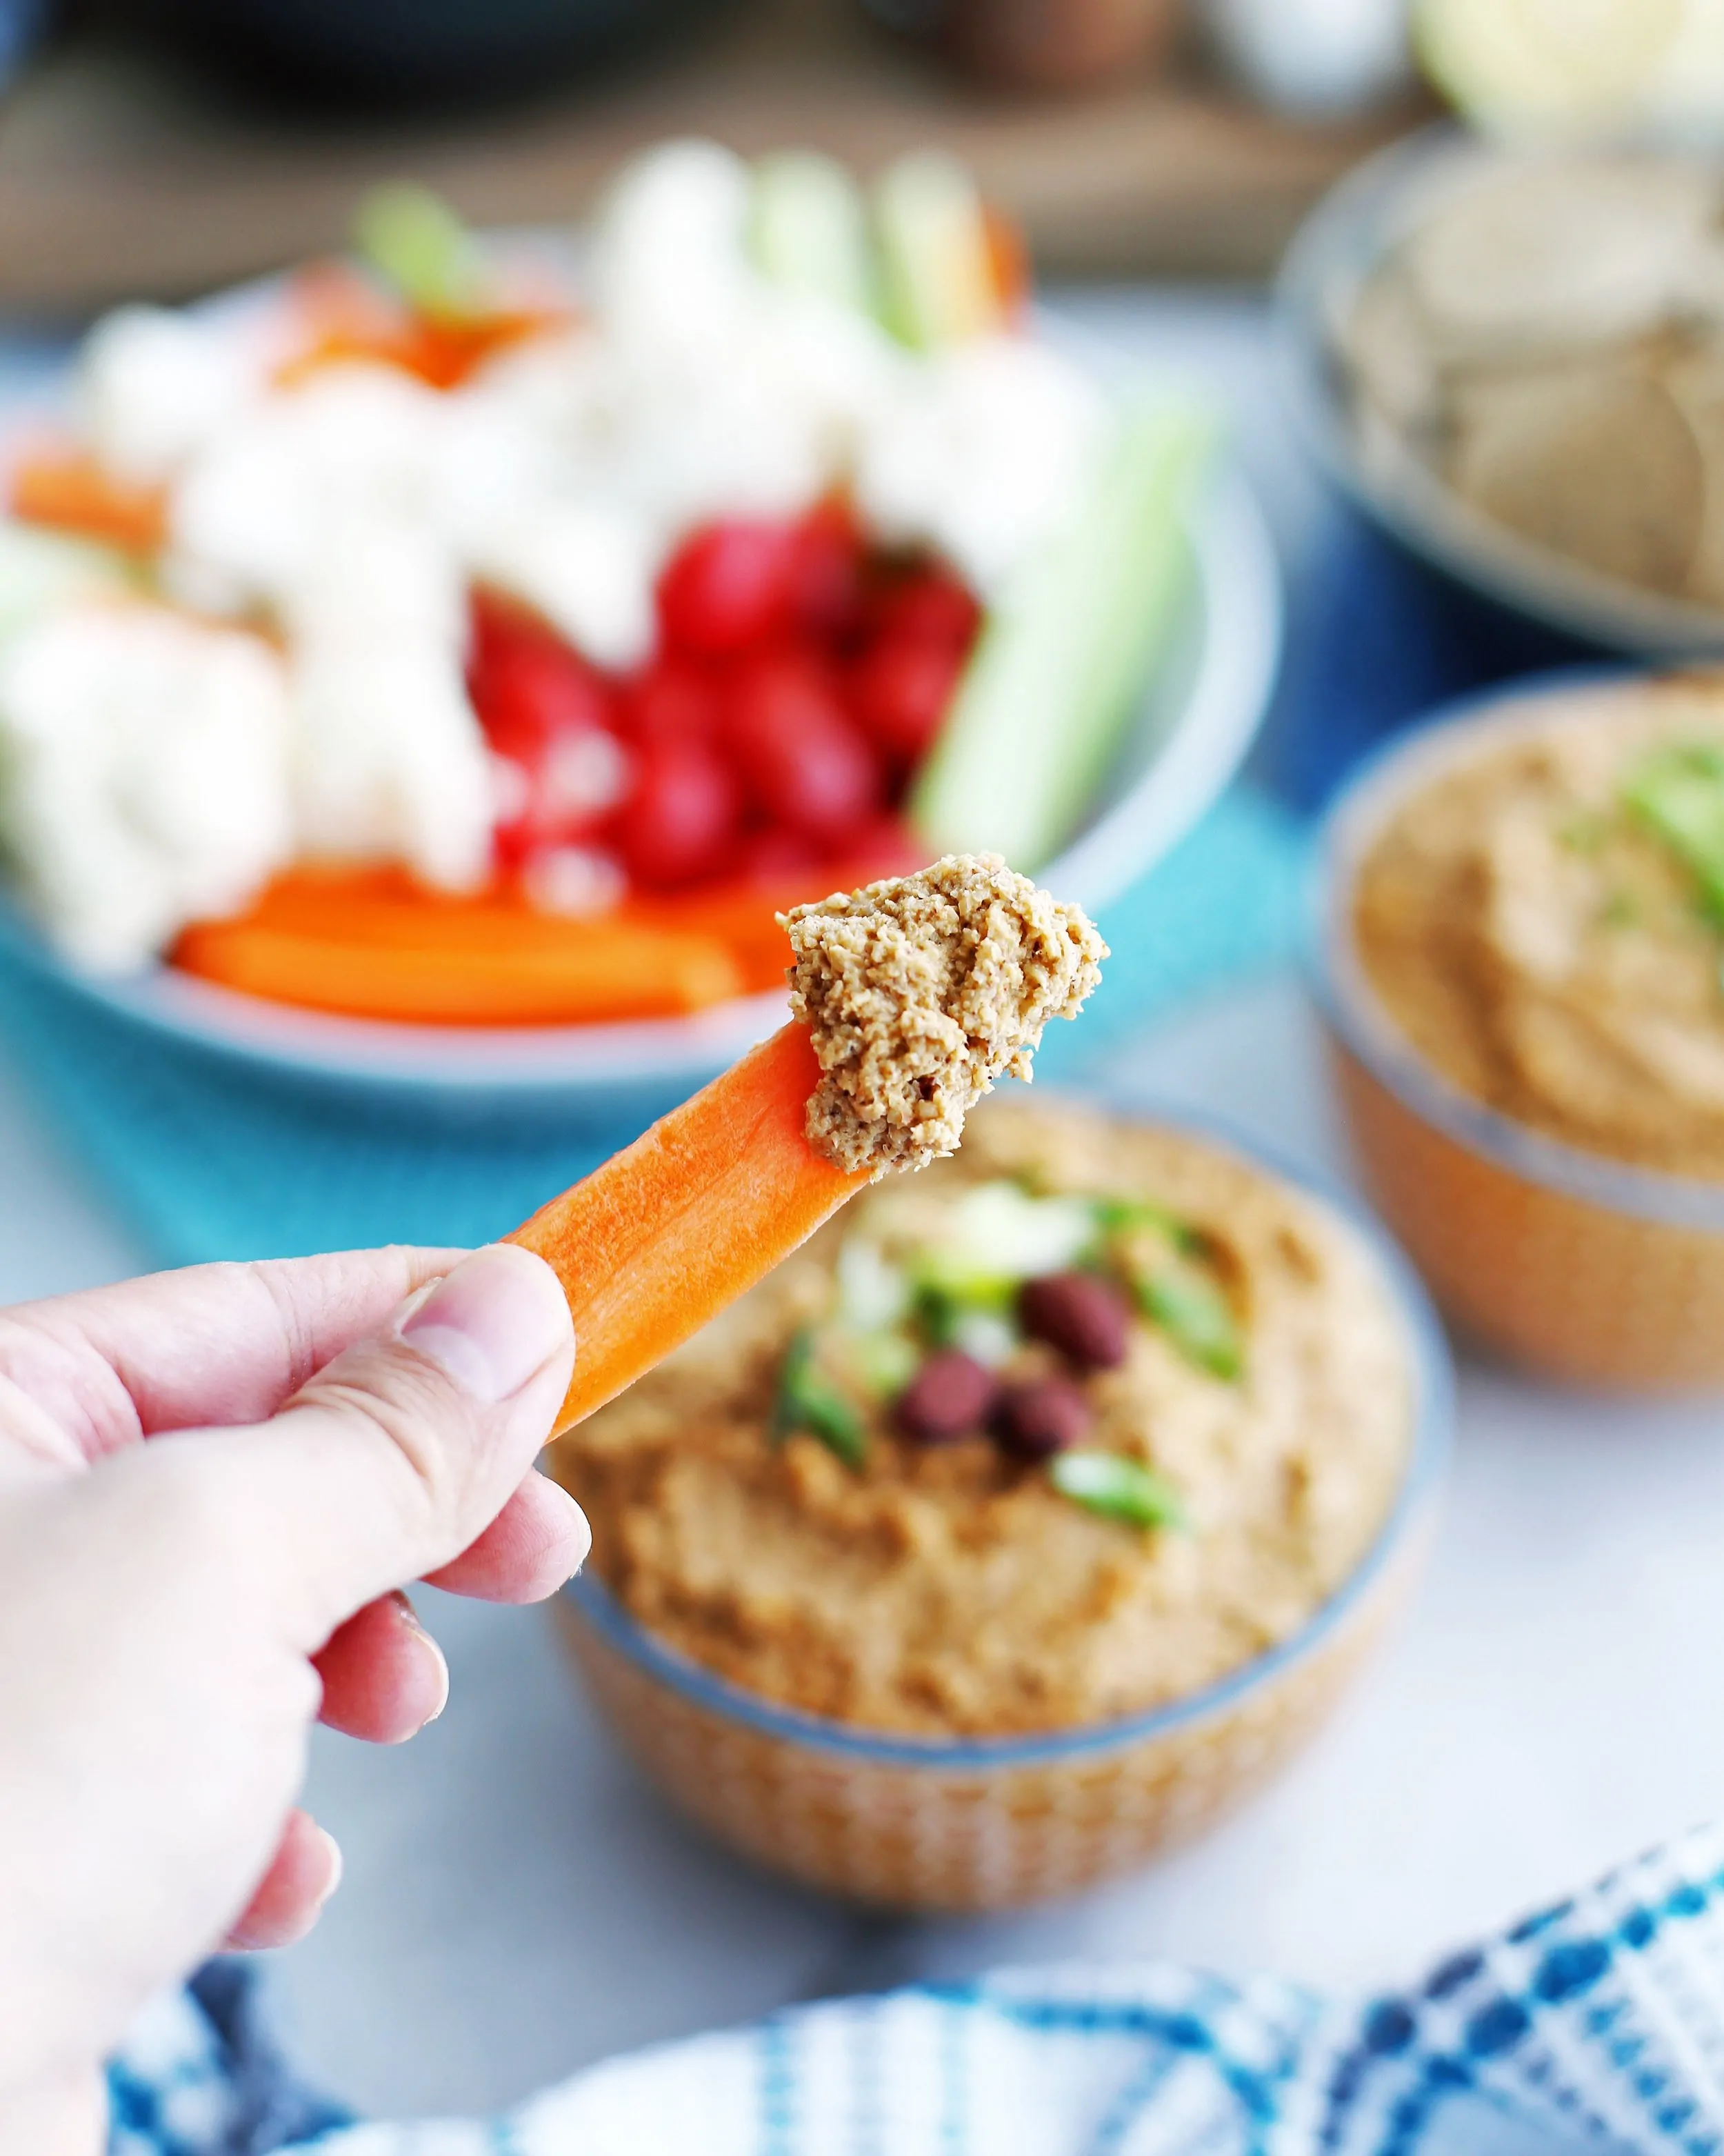 Close-up view of a hand holding a carrot stick that has been dipped in spicy roasted cauliflower garlic dip.